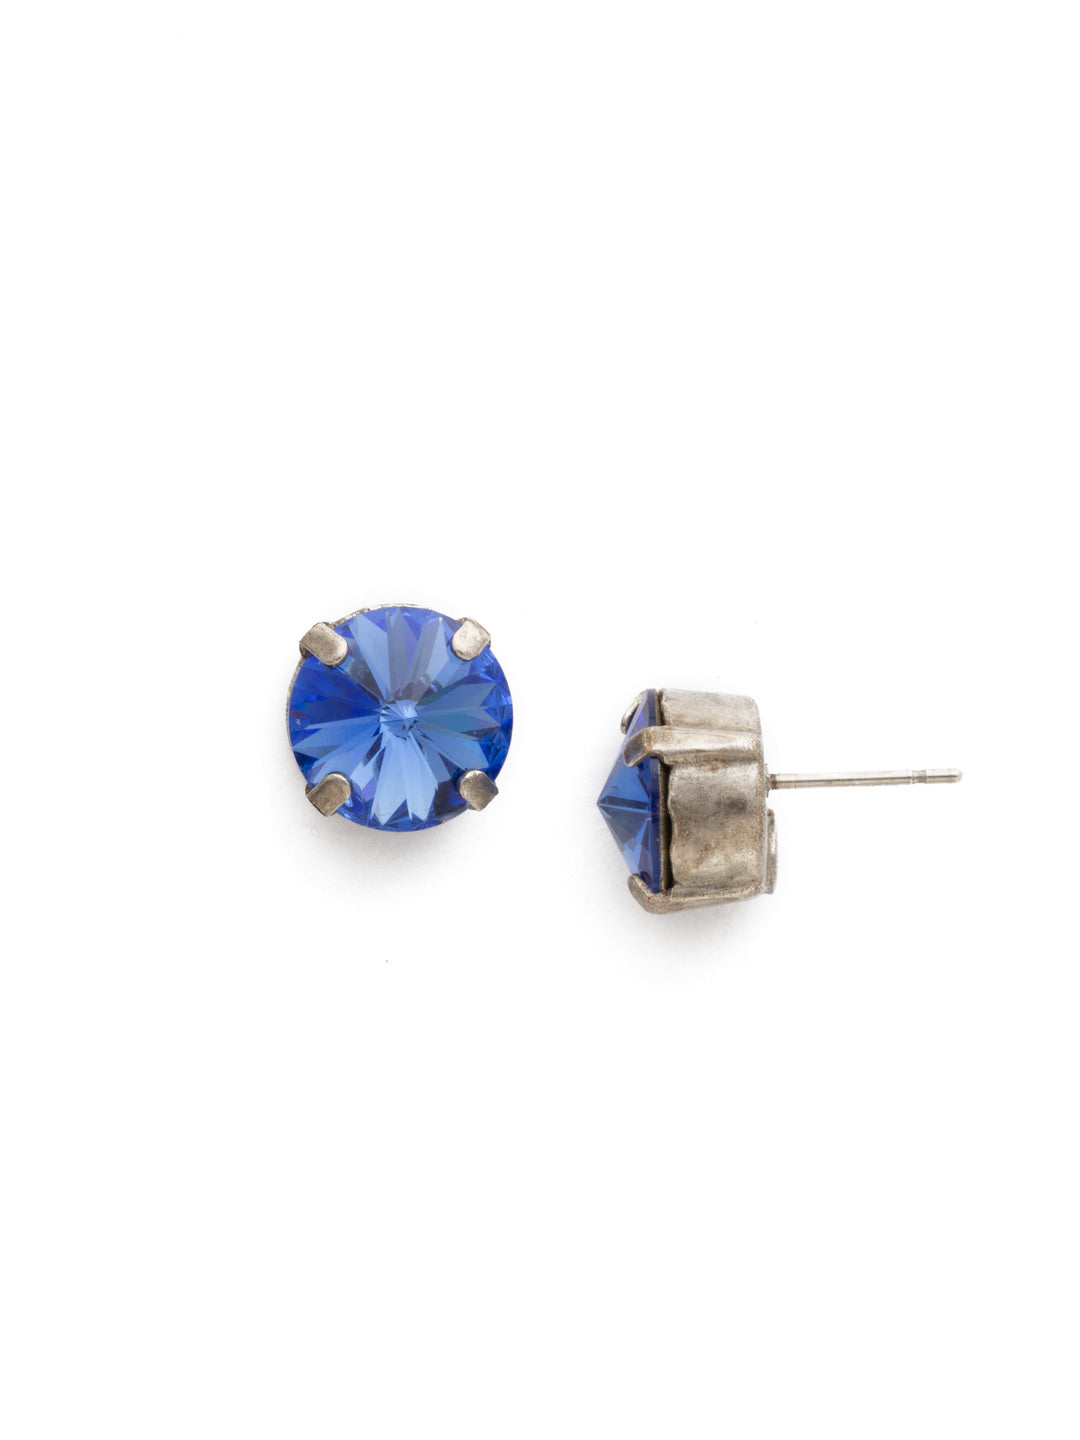 London Stud Earrings - ECM14ASSAP - <p>Everyone needs a great pair of studs. Add some classic sparkle to any occasion with these stud earrings. Need help picking a stud? <a href="https://www.sorrelli.com/blogs/sisterhood/round-stud-earrings-101-a-rundown-of-sizes-styles-and-sparkle">Check out our size guide!</a> From Sorrelli's Sapphire collection in our Antique Silver-tone finish.</p>